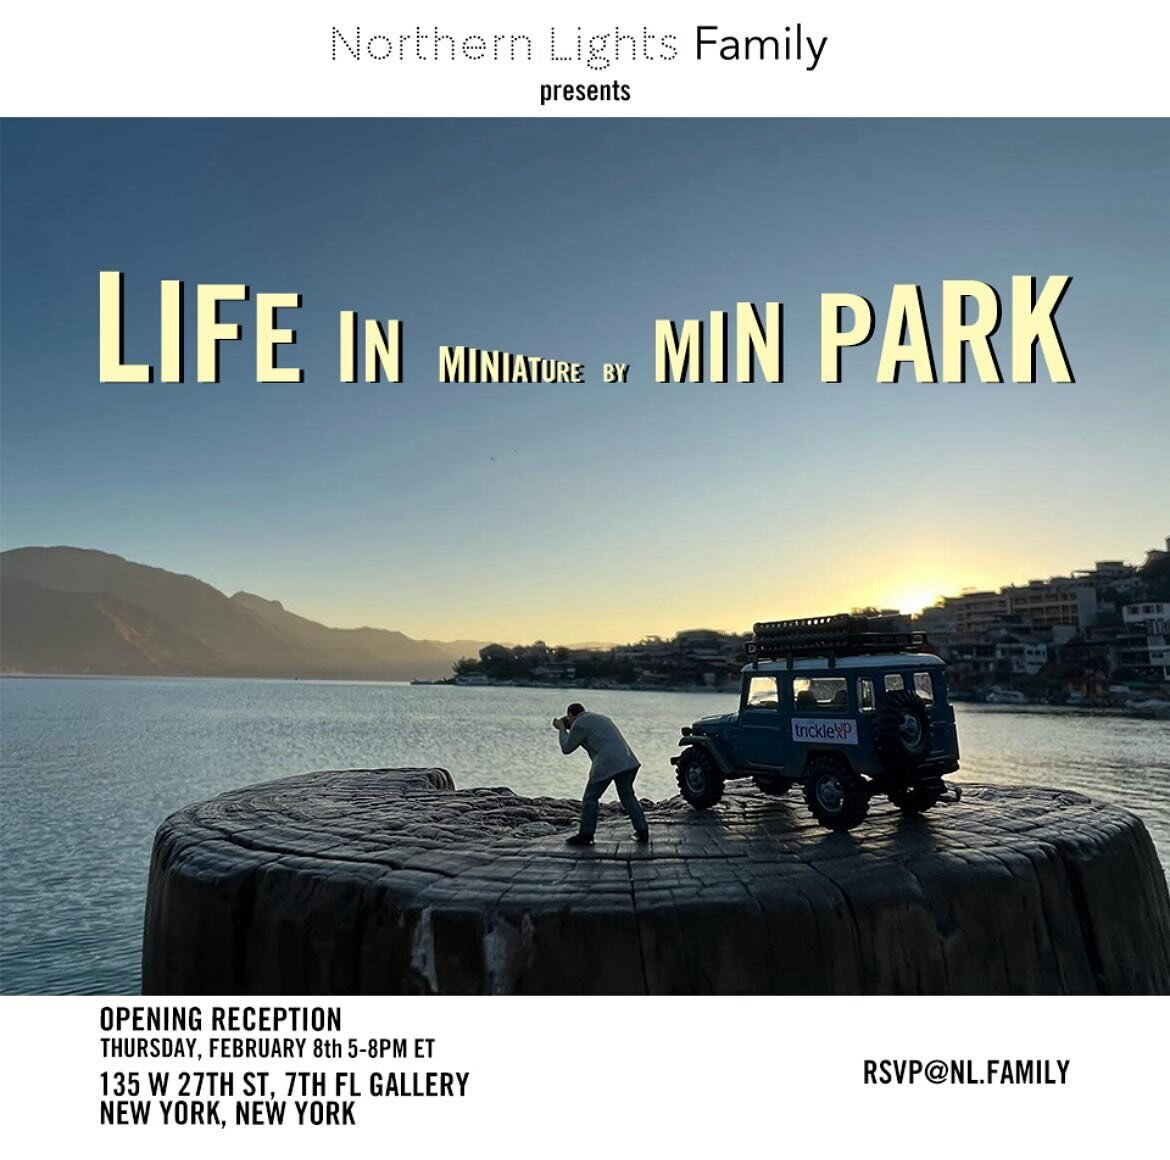 You&rsquo;re invited to join us on Thursday, February 8th for the opening reception of &ldquo;Life in Miniature&rdquo;, featuring the photographs by @bodegastudios Sr. Producer Min Park!
&nbsp;
Min Park creates interesting scenes and elaborate backst